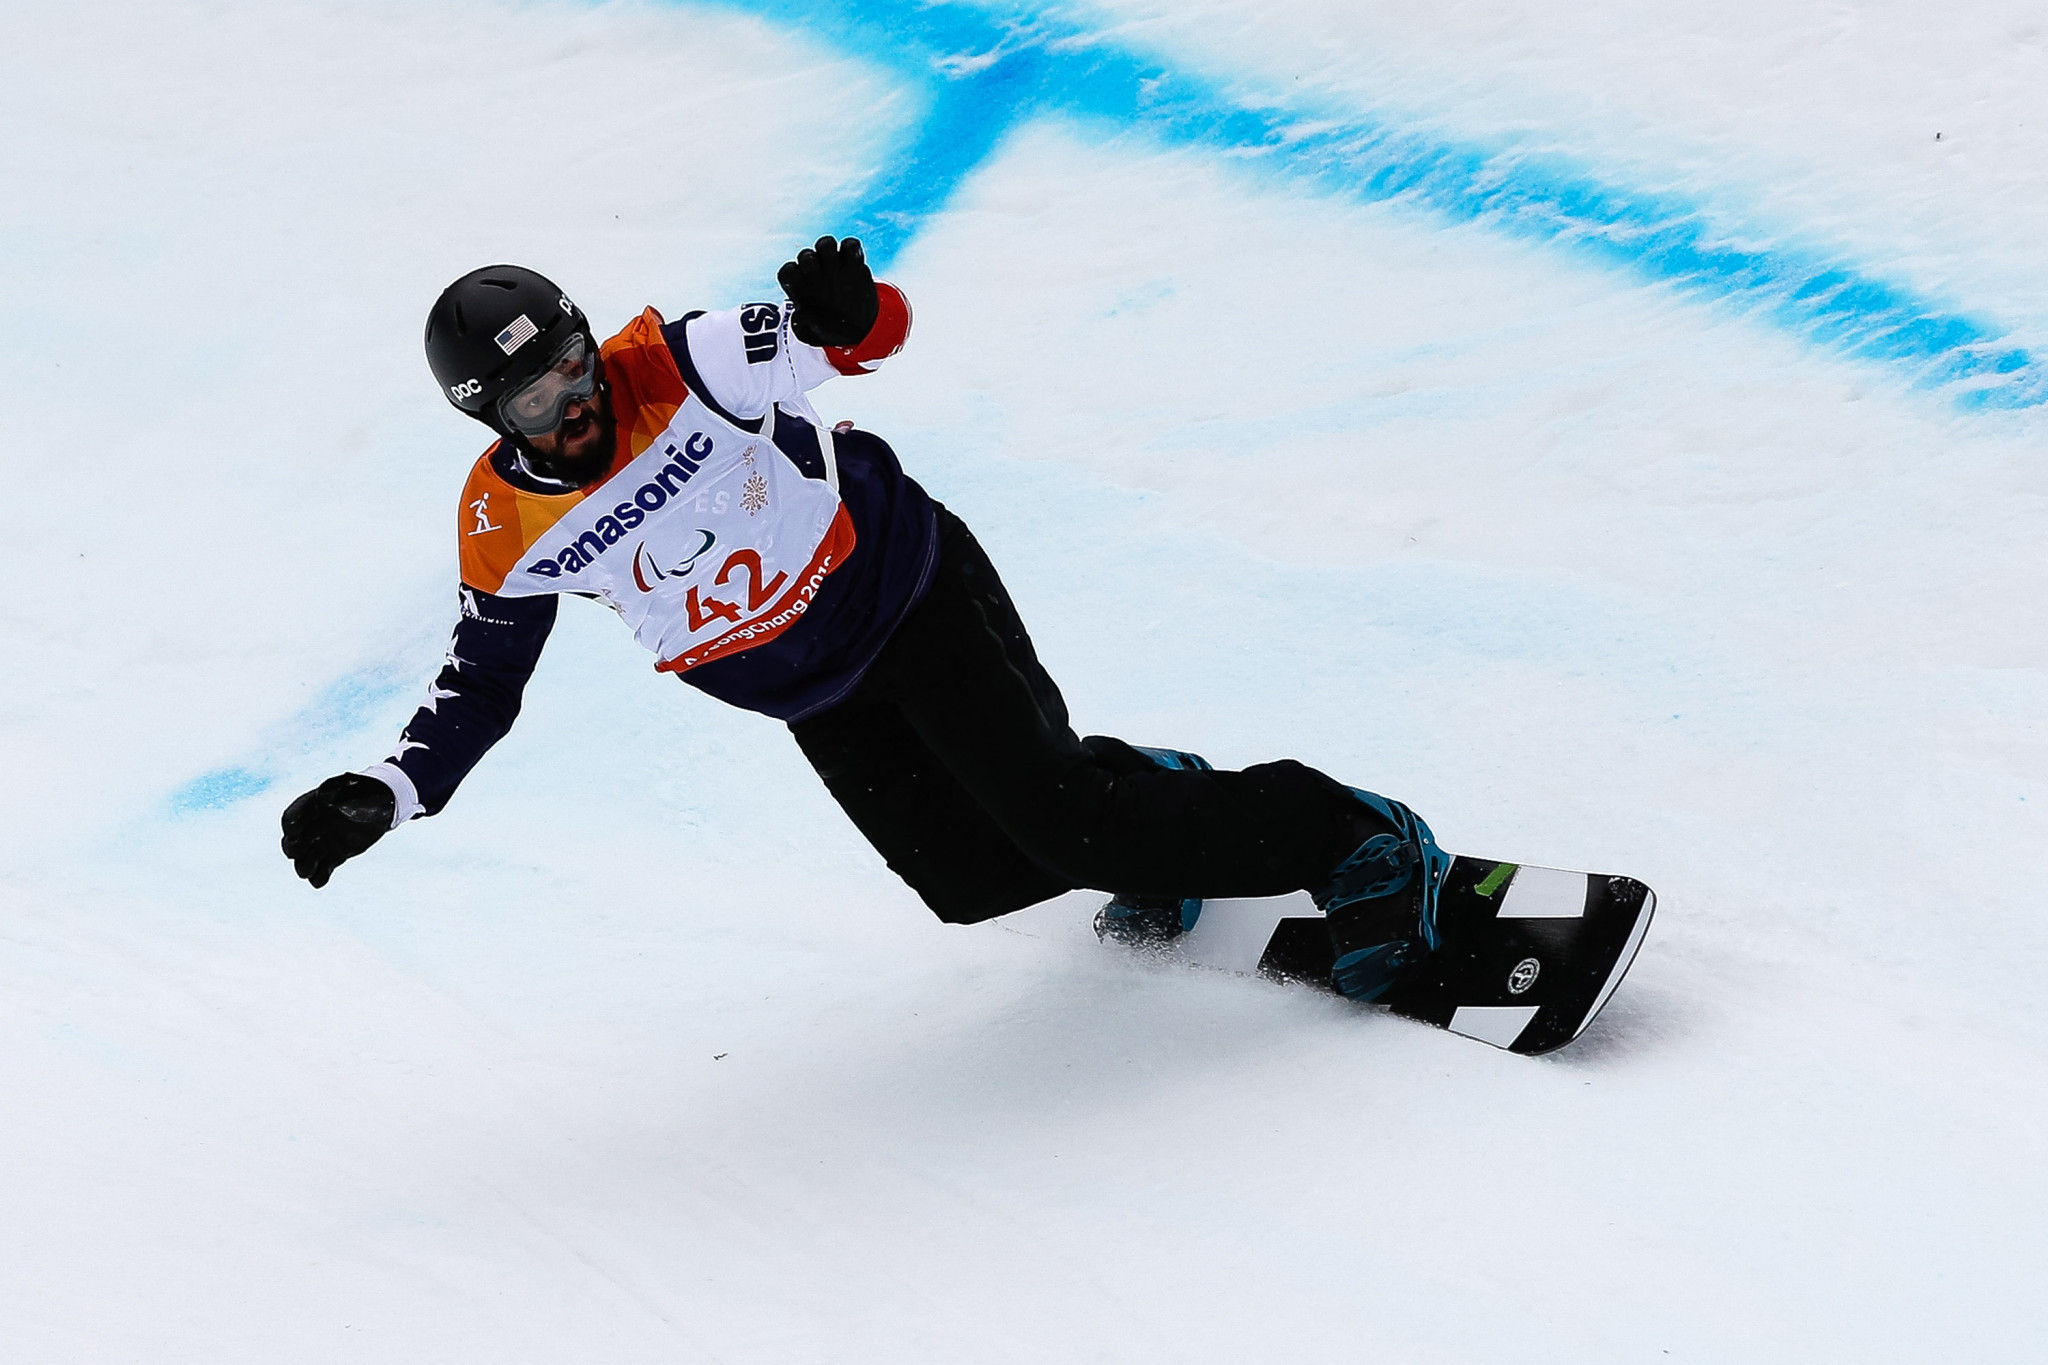 Keith Gabel secured one of two gold medals for the United States on the first of two days of racing at the World Para Snowboard World Cup Finals ©Getty Images